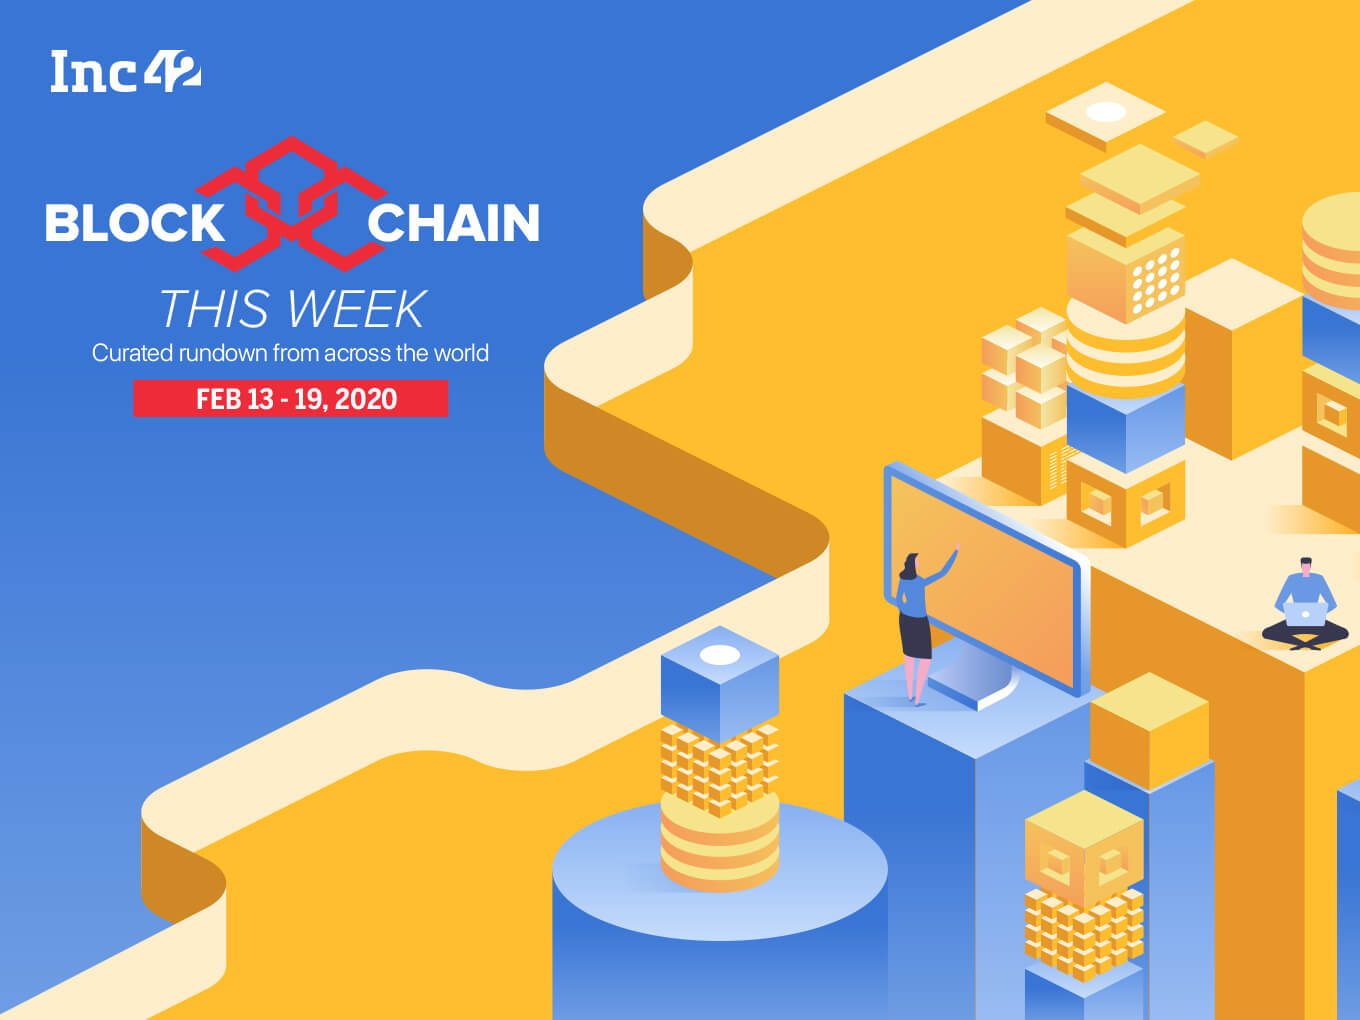 Blockchain This Week: Election Commission’s Blockchain Voting Tech; Blockchain For Ticketing And More